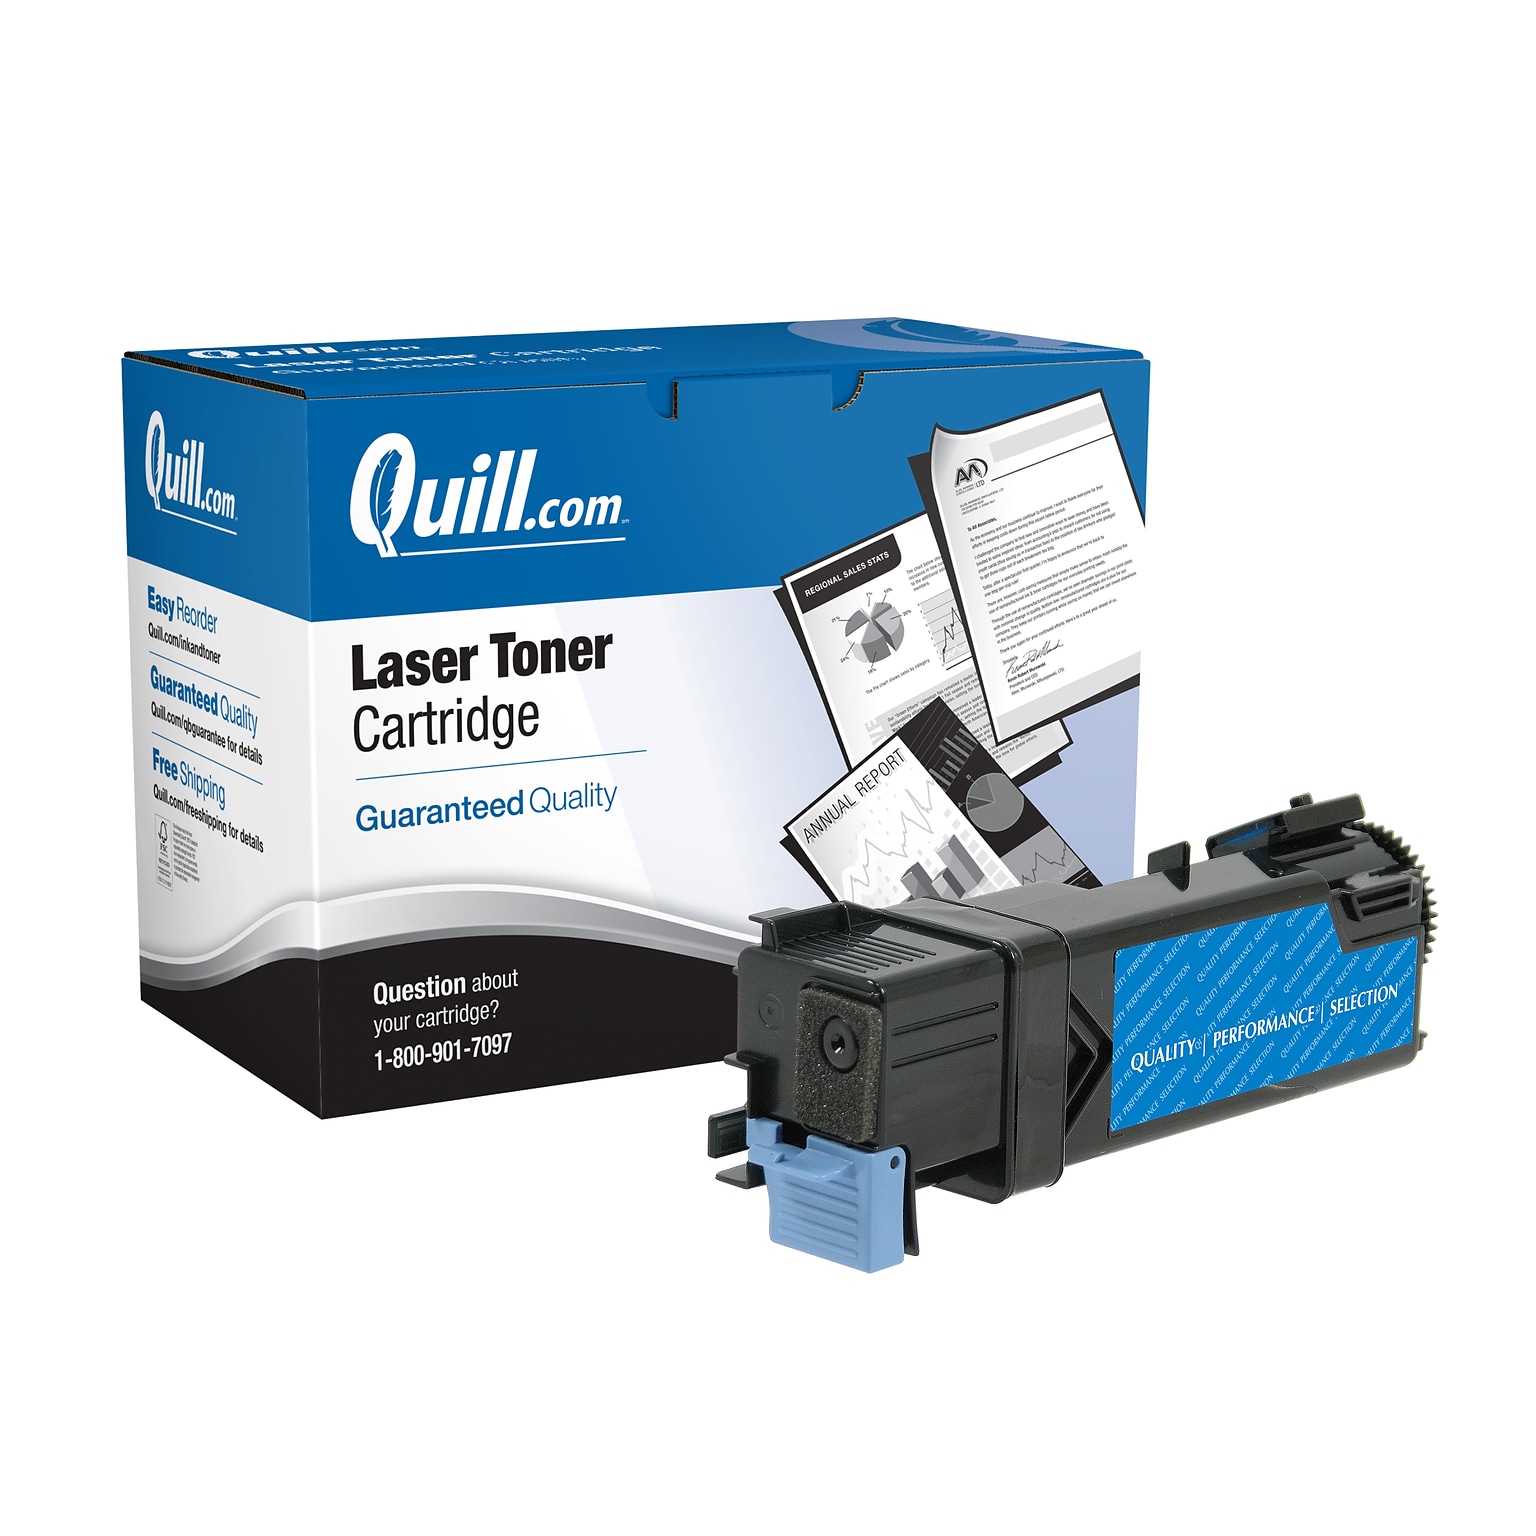 Quill Brand® Remanufactured Cyan High Yield Toner Cartridge Replacement for Dell 2150/2155 (THKJ8) (Lifetime Warranty)